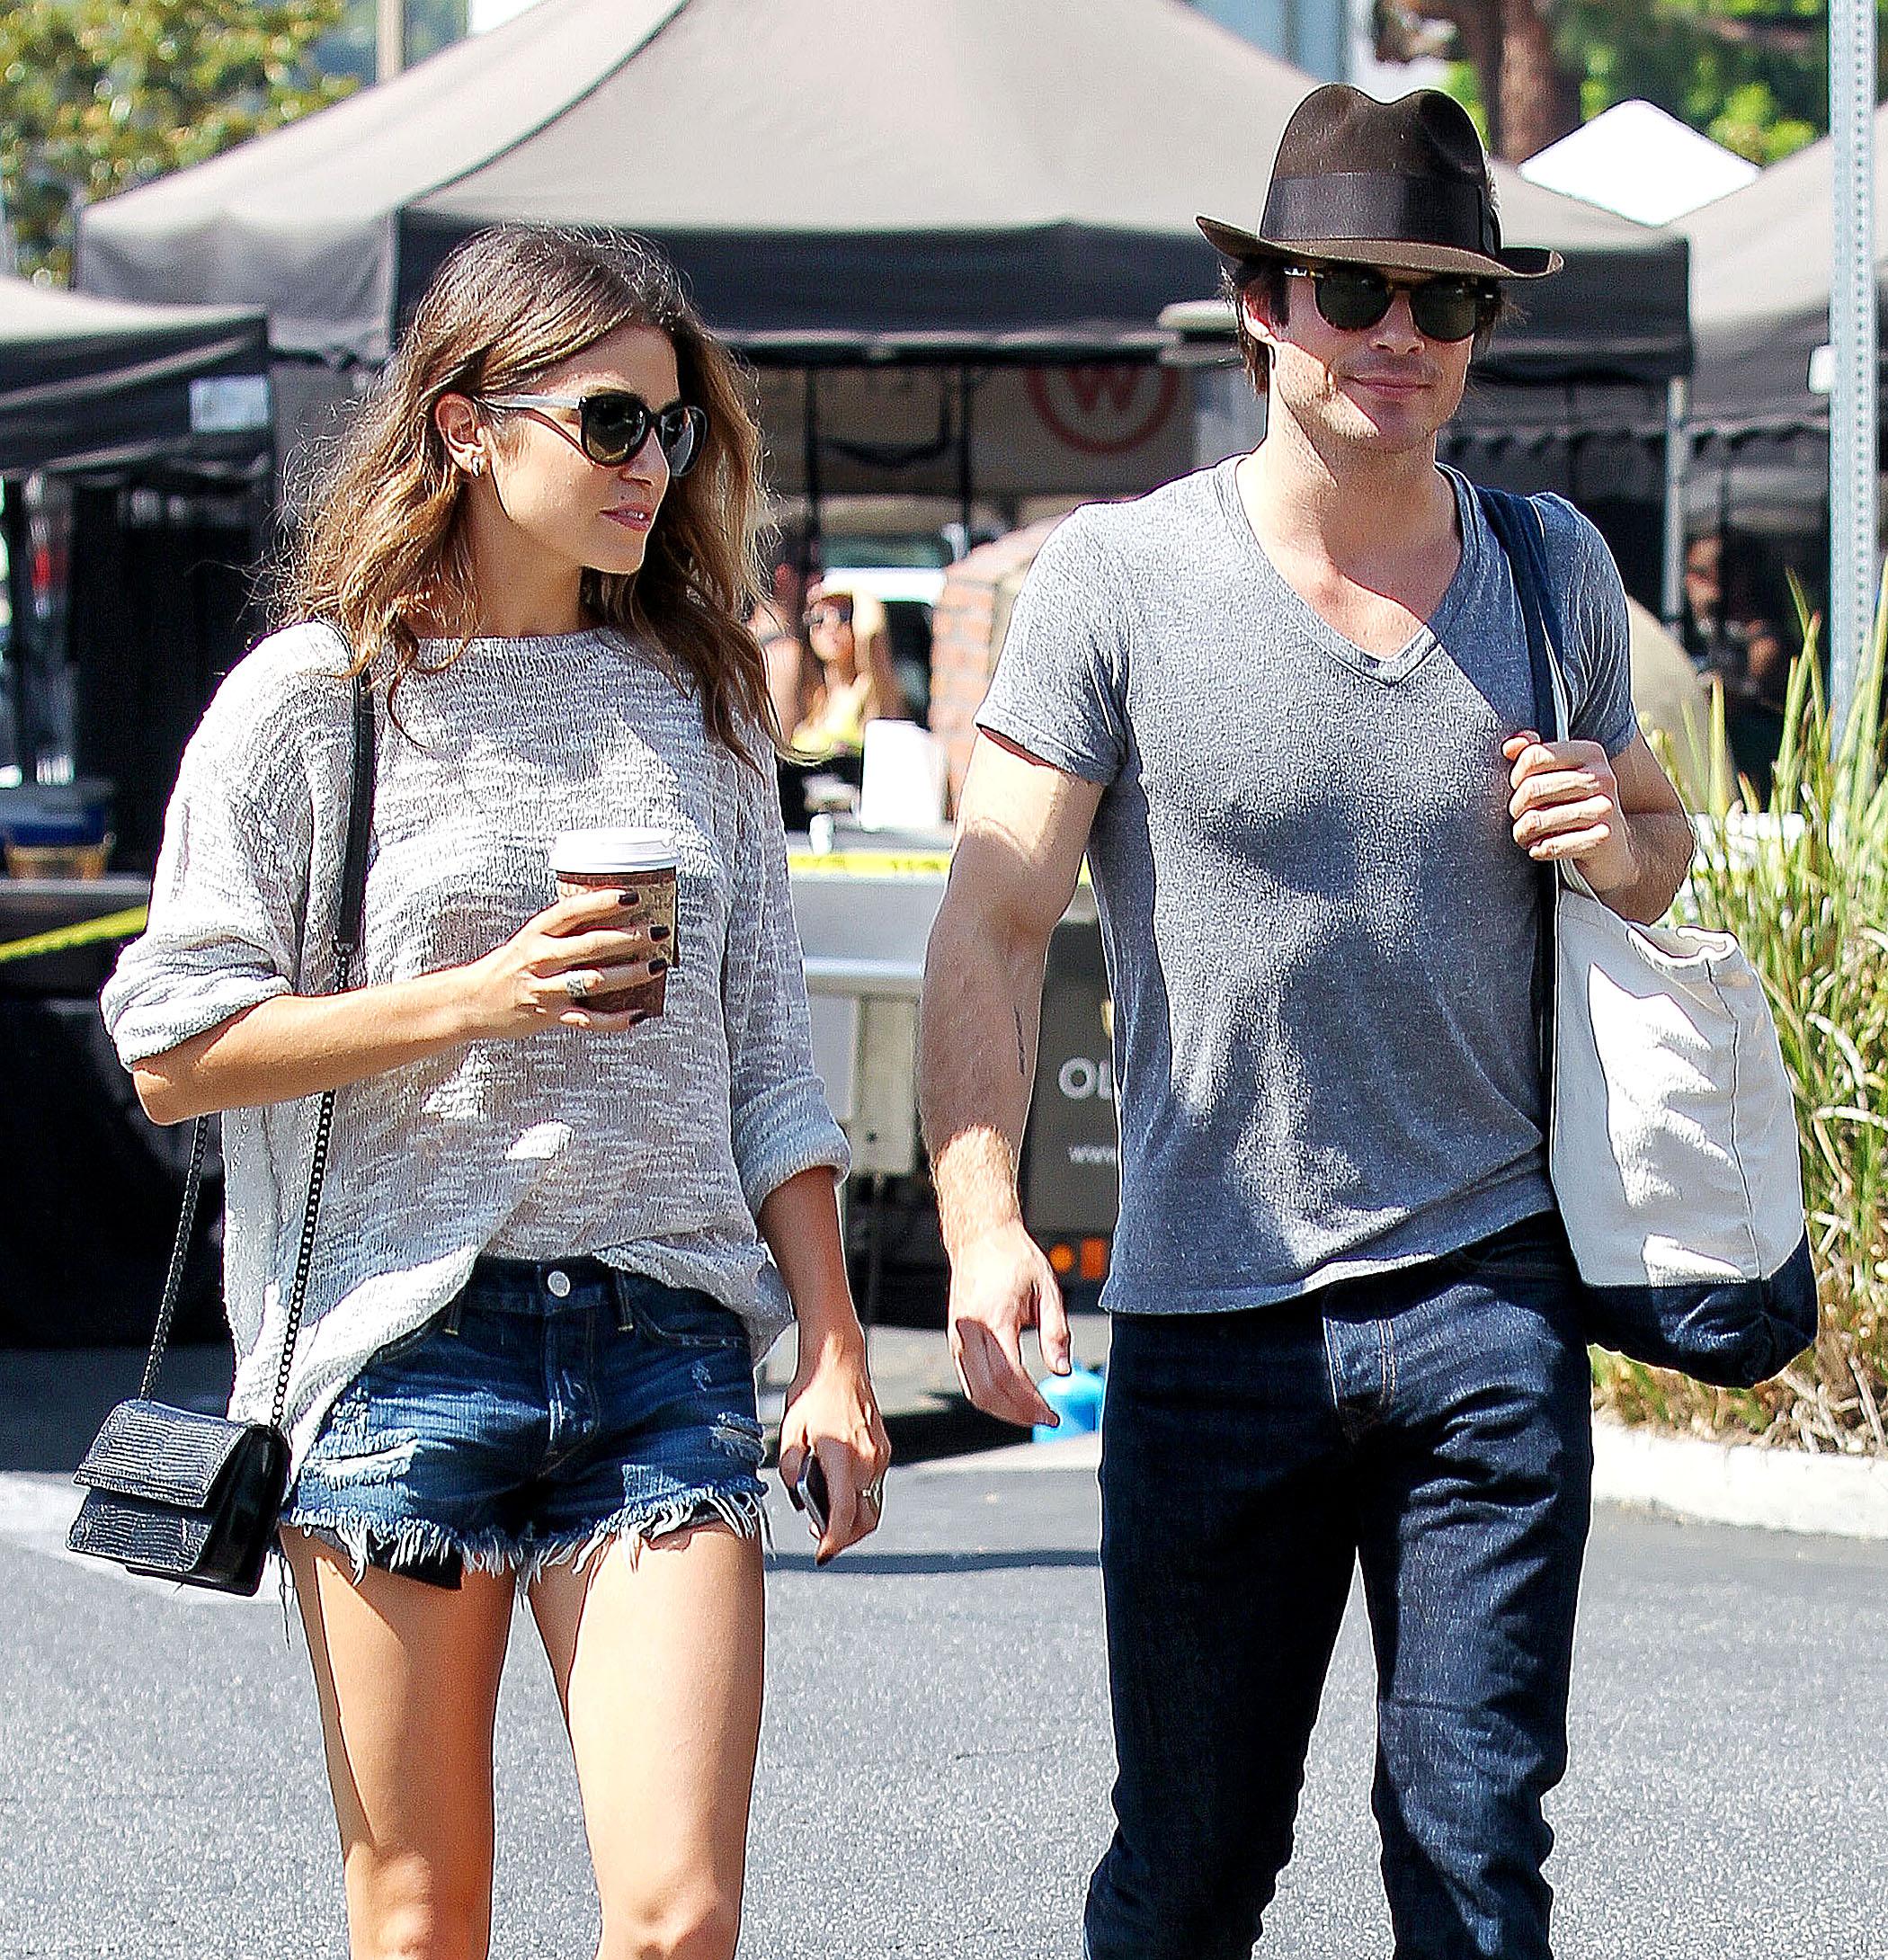 Ian Somerhalder And Nikki Reed May Be The Cutest Celeb Couple!